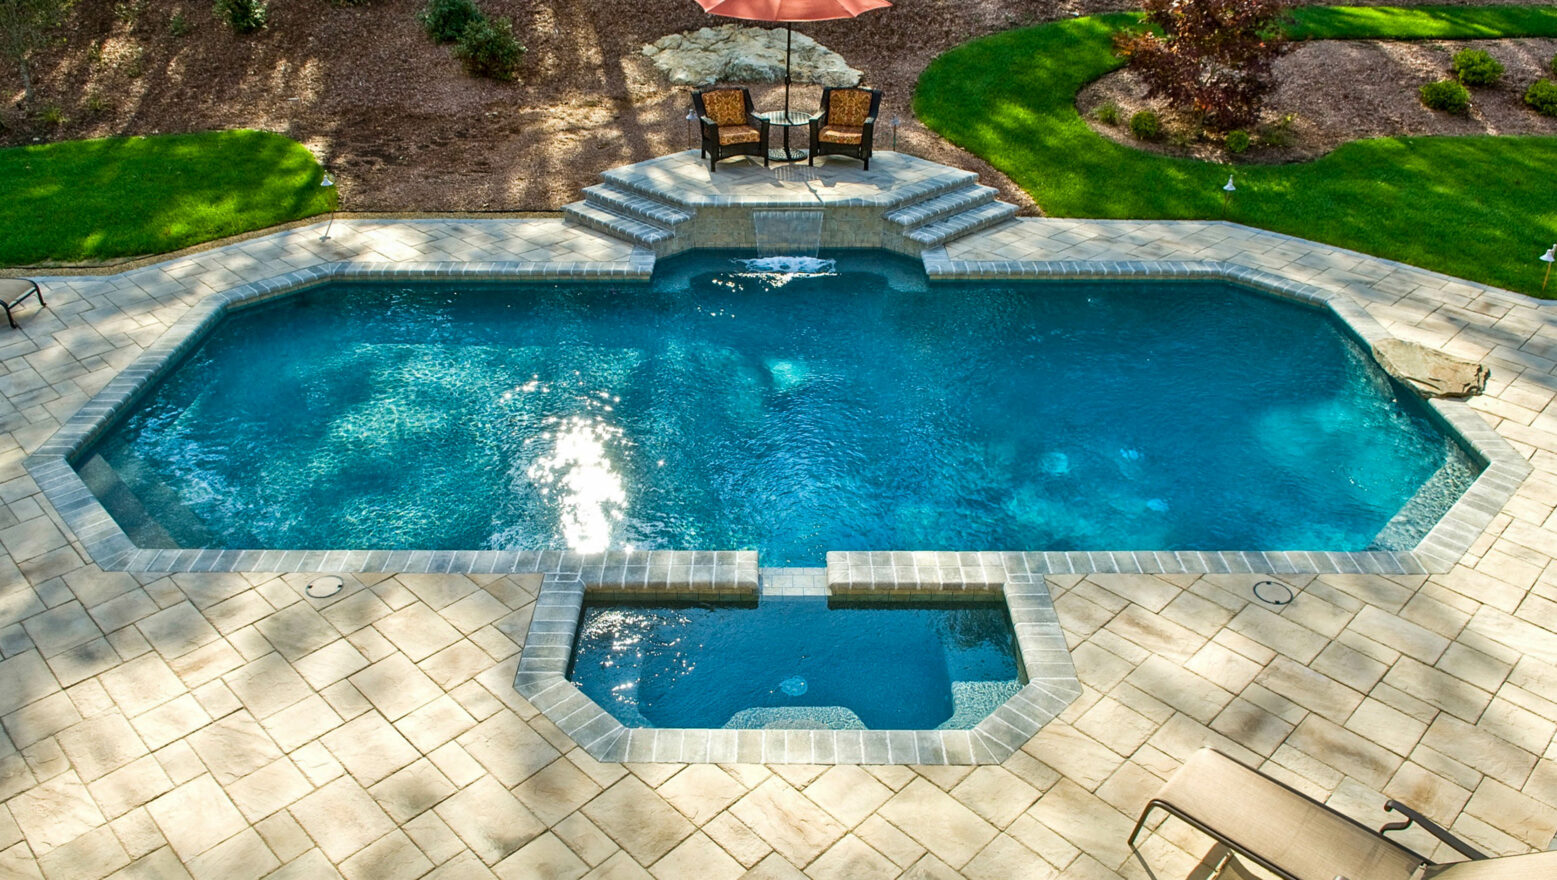 Pool with a water feature.